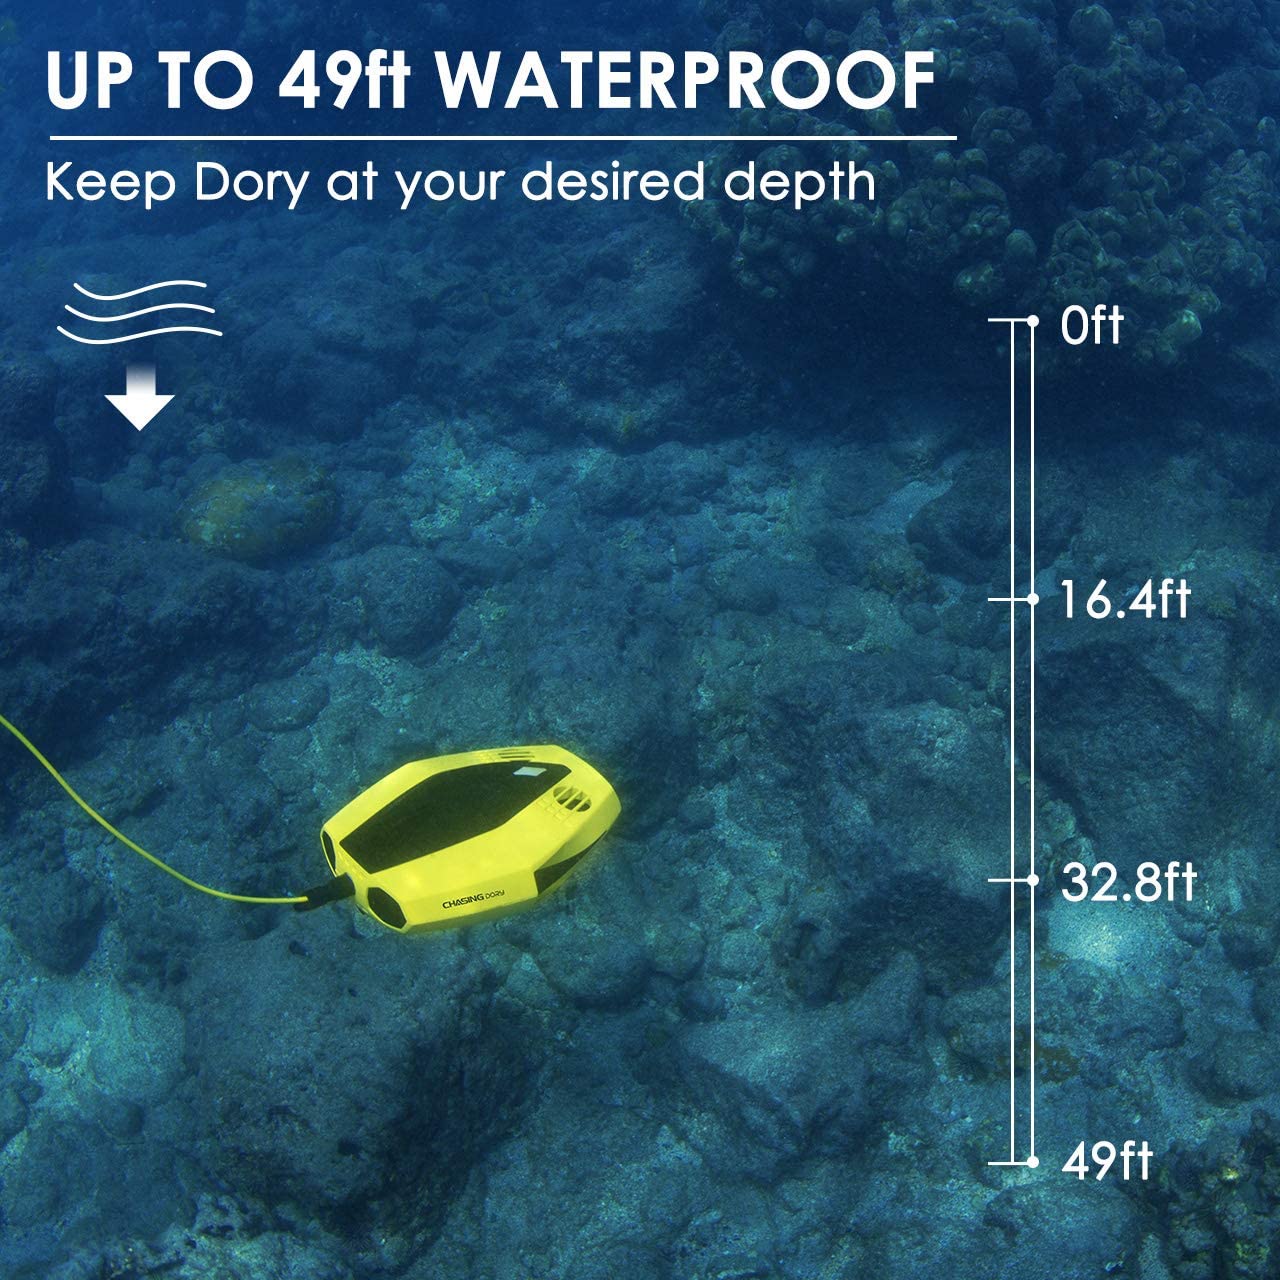 CHASING-Dory-Palm-Sized-APP-Control-Underwater-Drone-with-1080p-Full-HD-Camera-for-Real-Time-Viewing-1754401-6